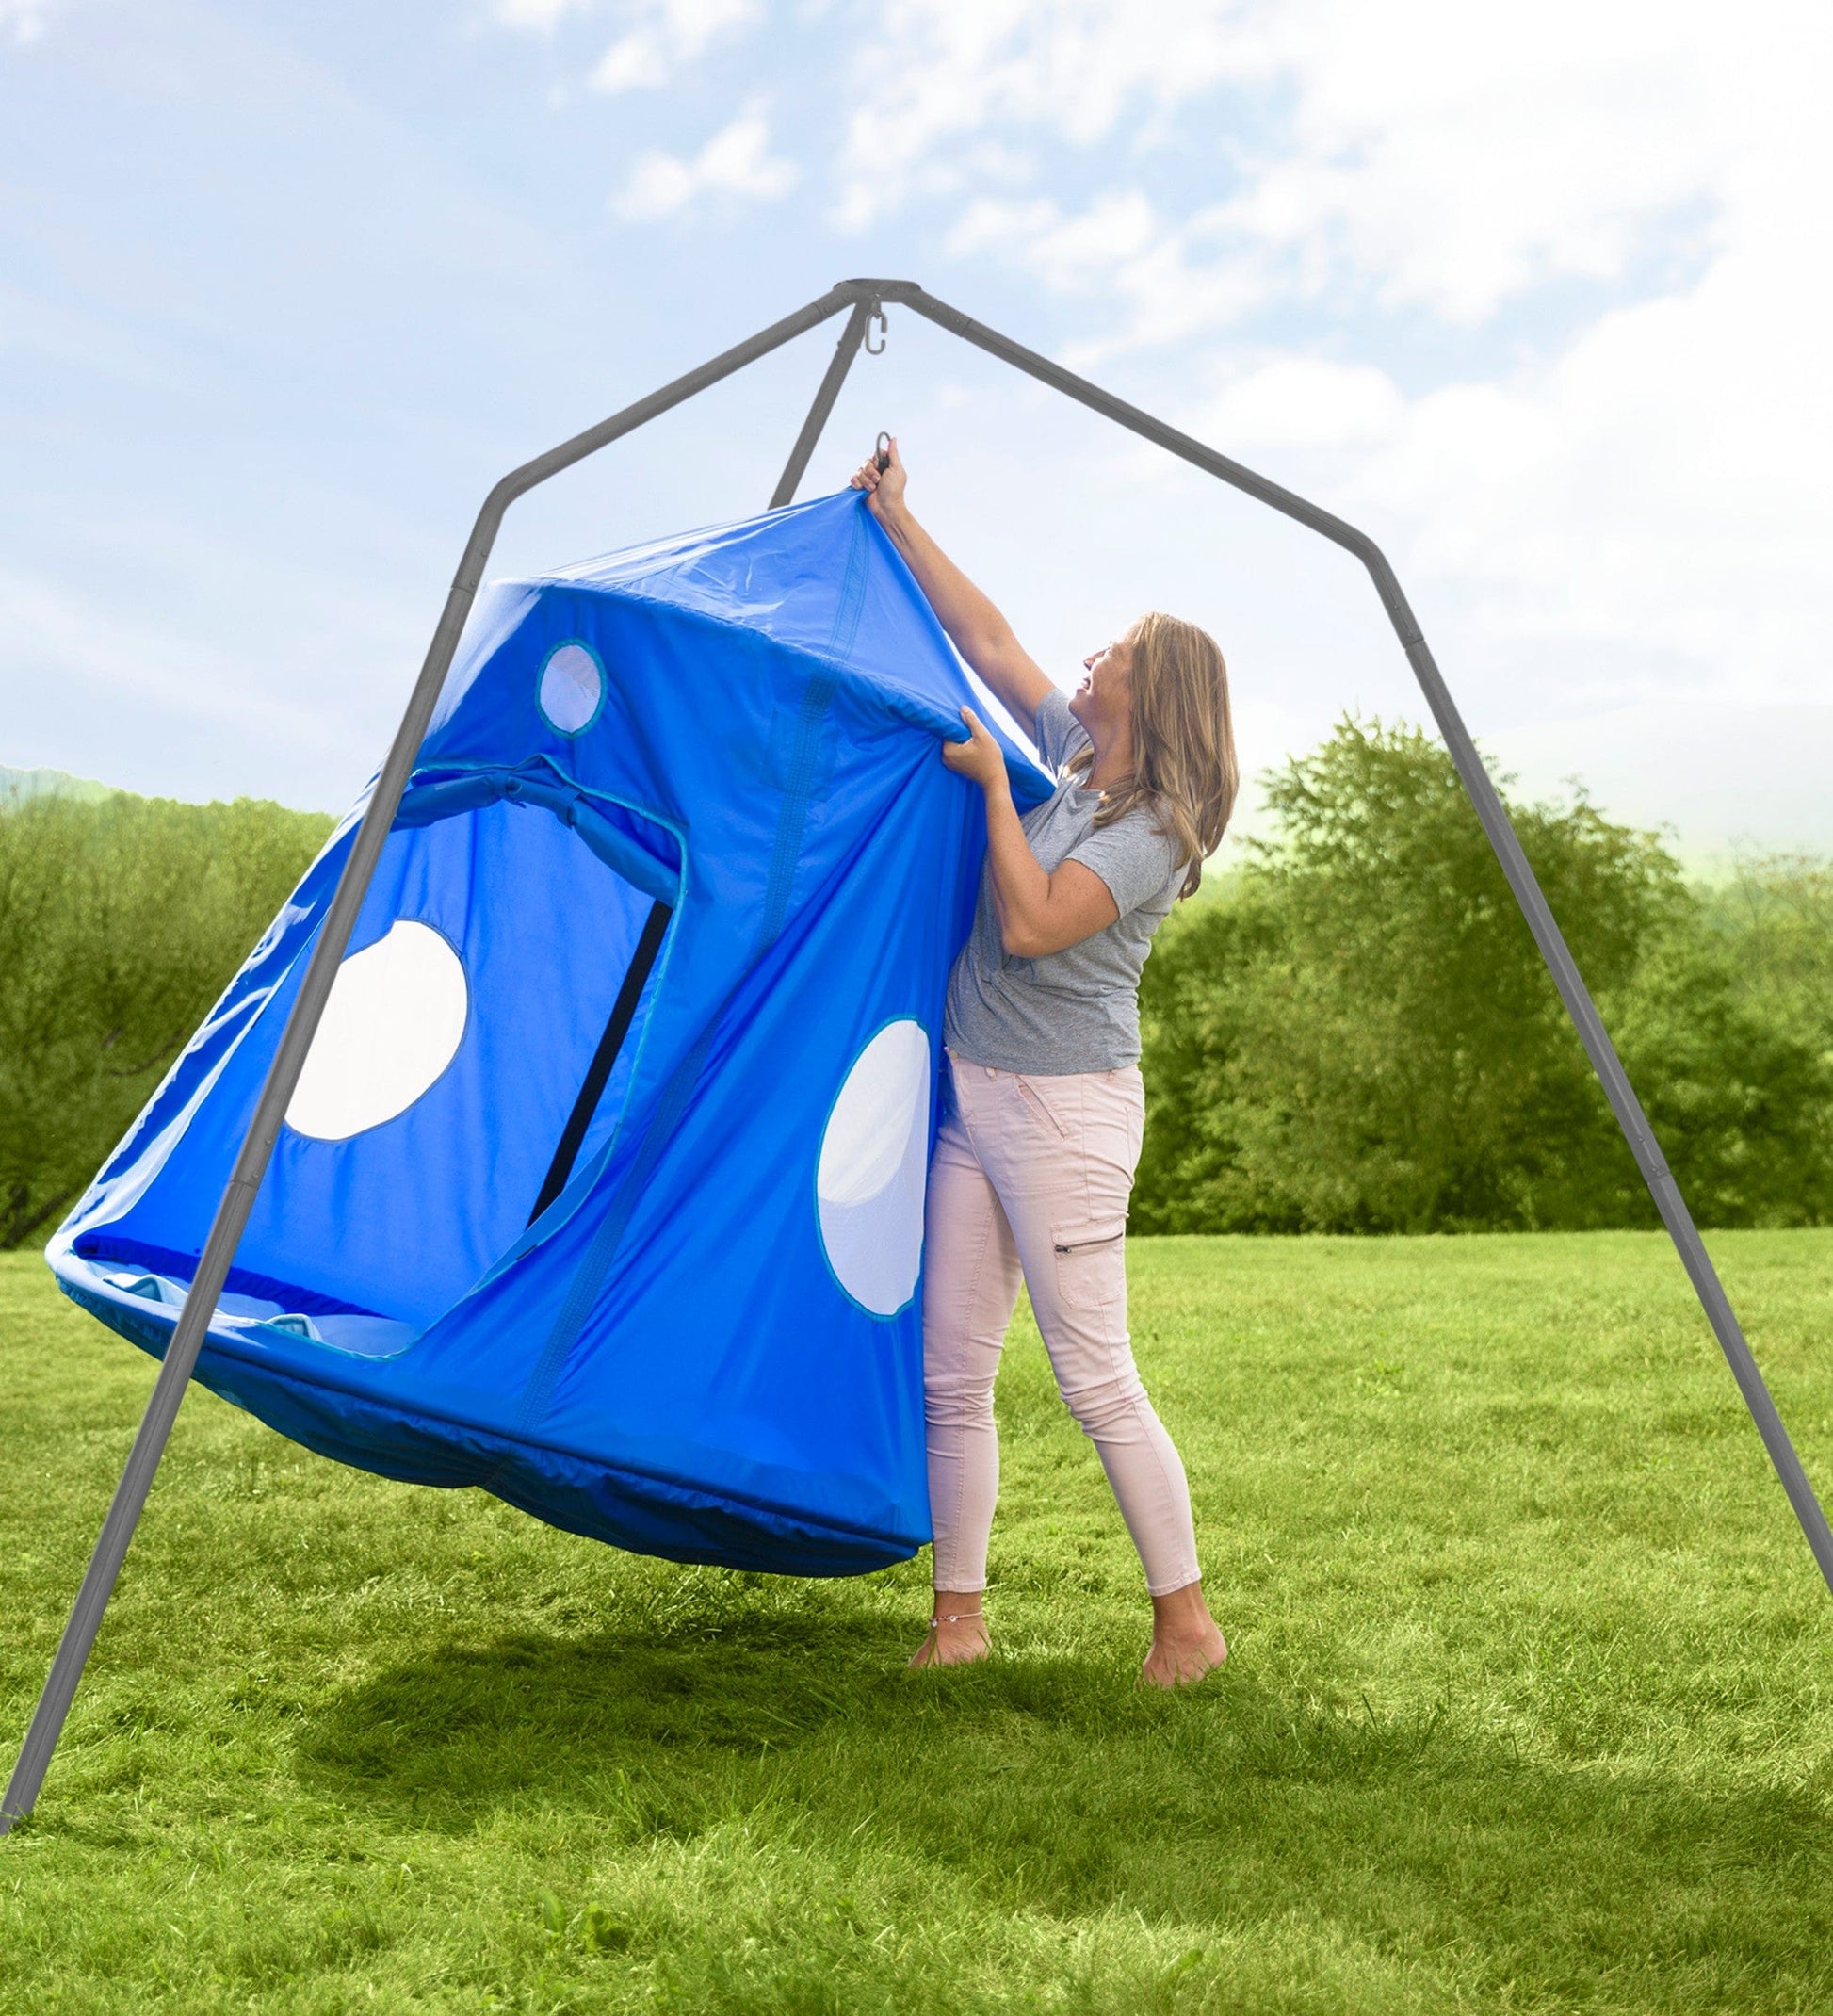 HugglePod HangOut Nylon Family Hanging Tent with Quilted Floor Mat and LED Lights